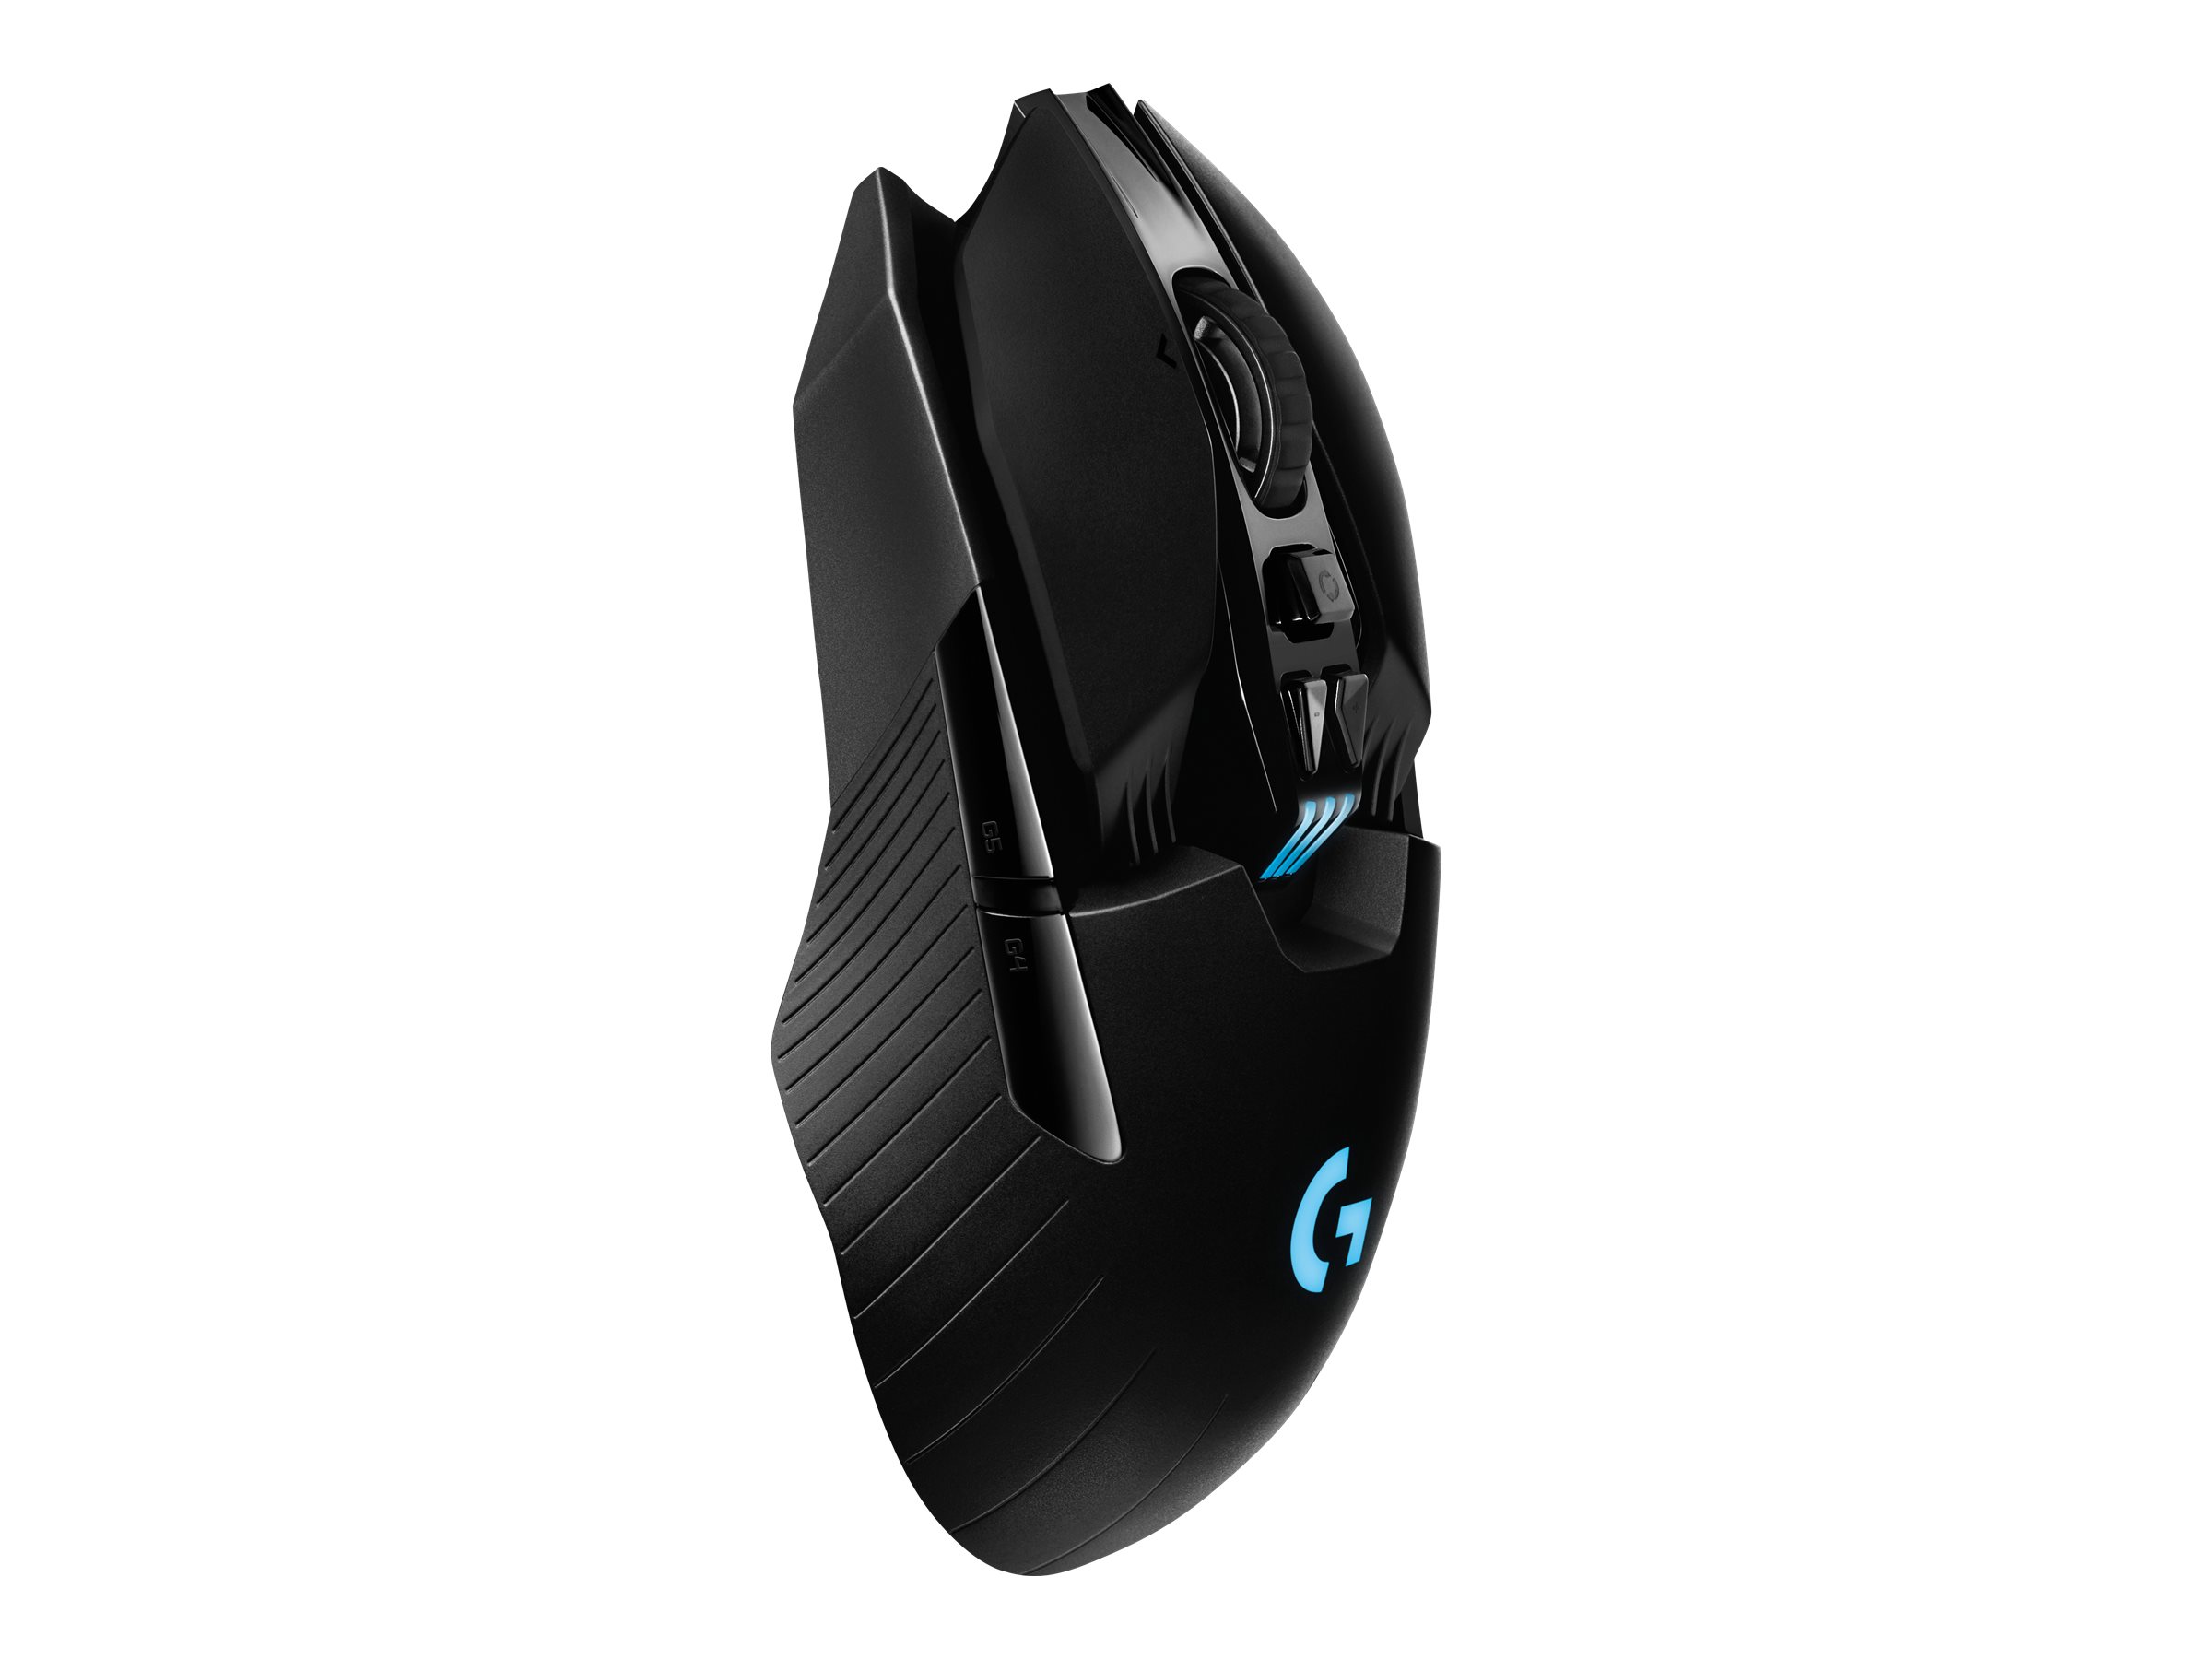 Logitech Wireless Gaming Mouse G903 with HERO 25K | www.shi.com